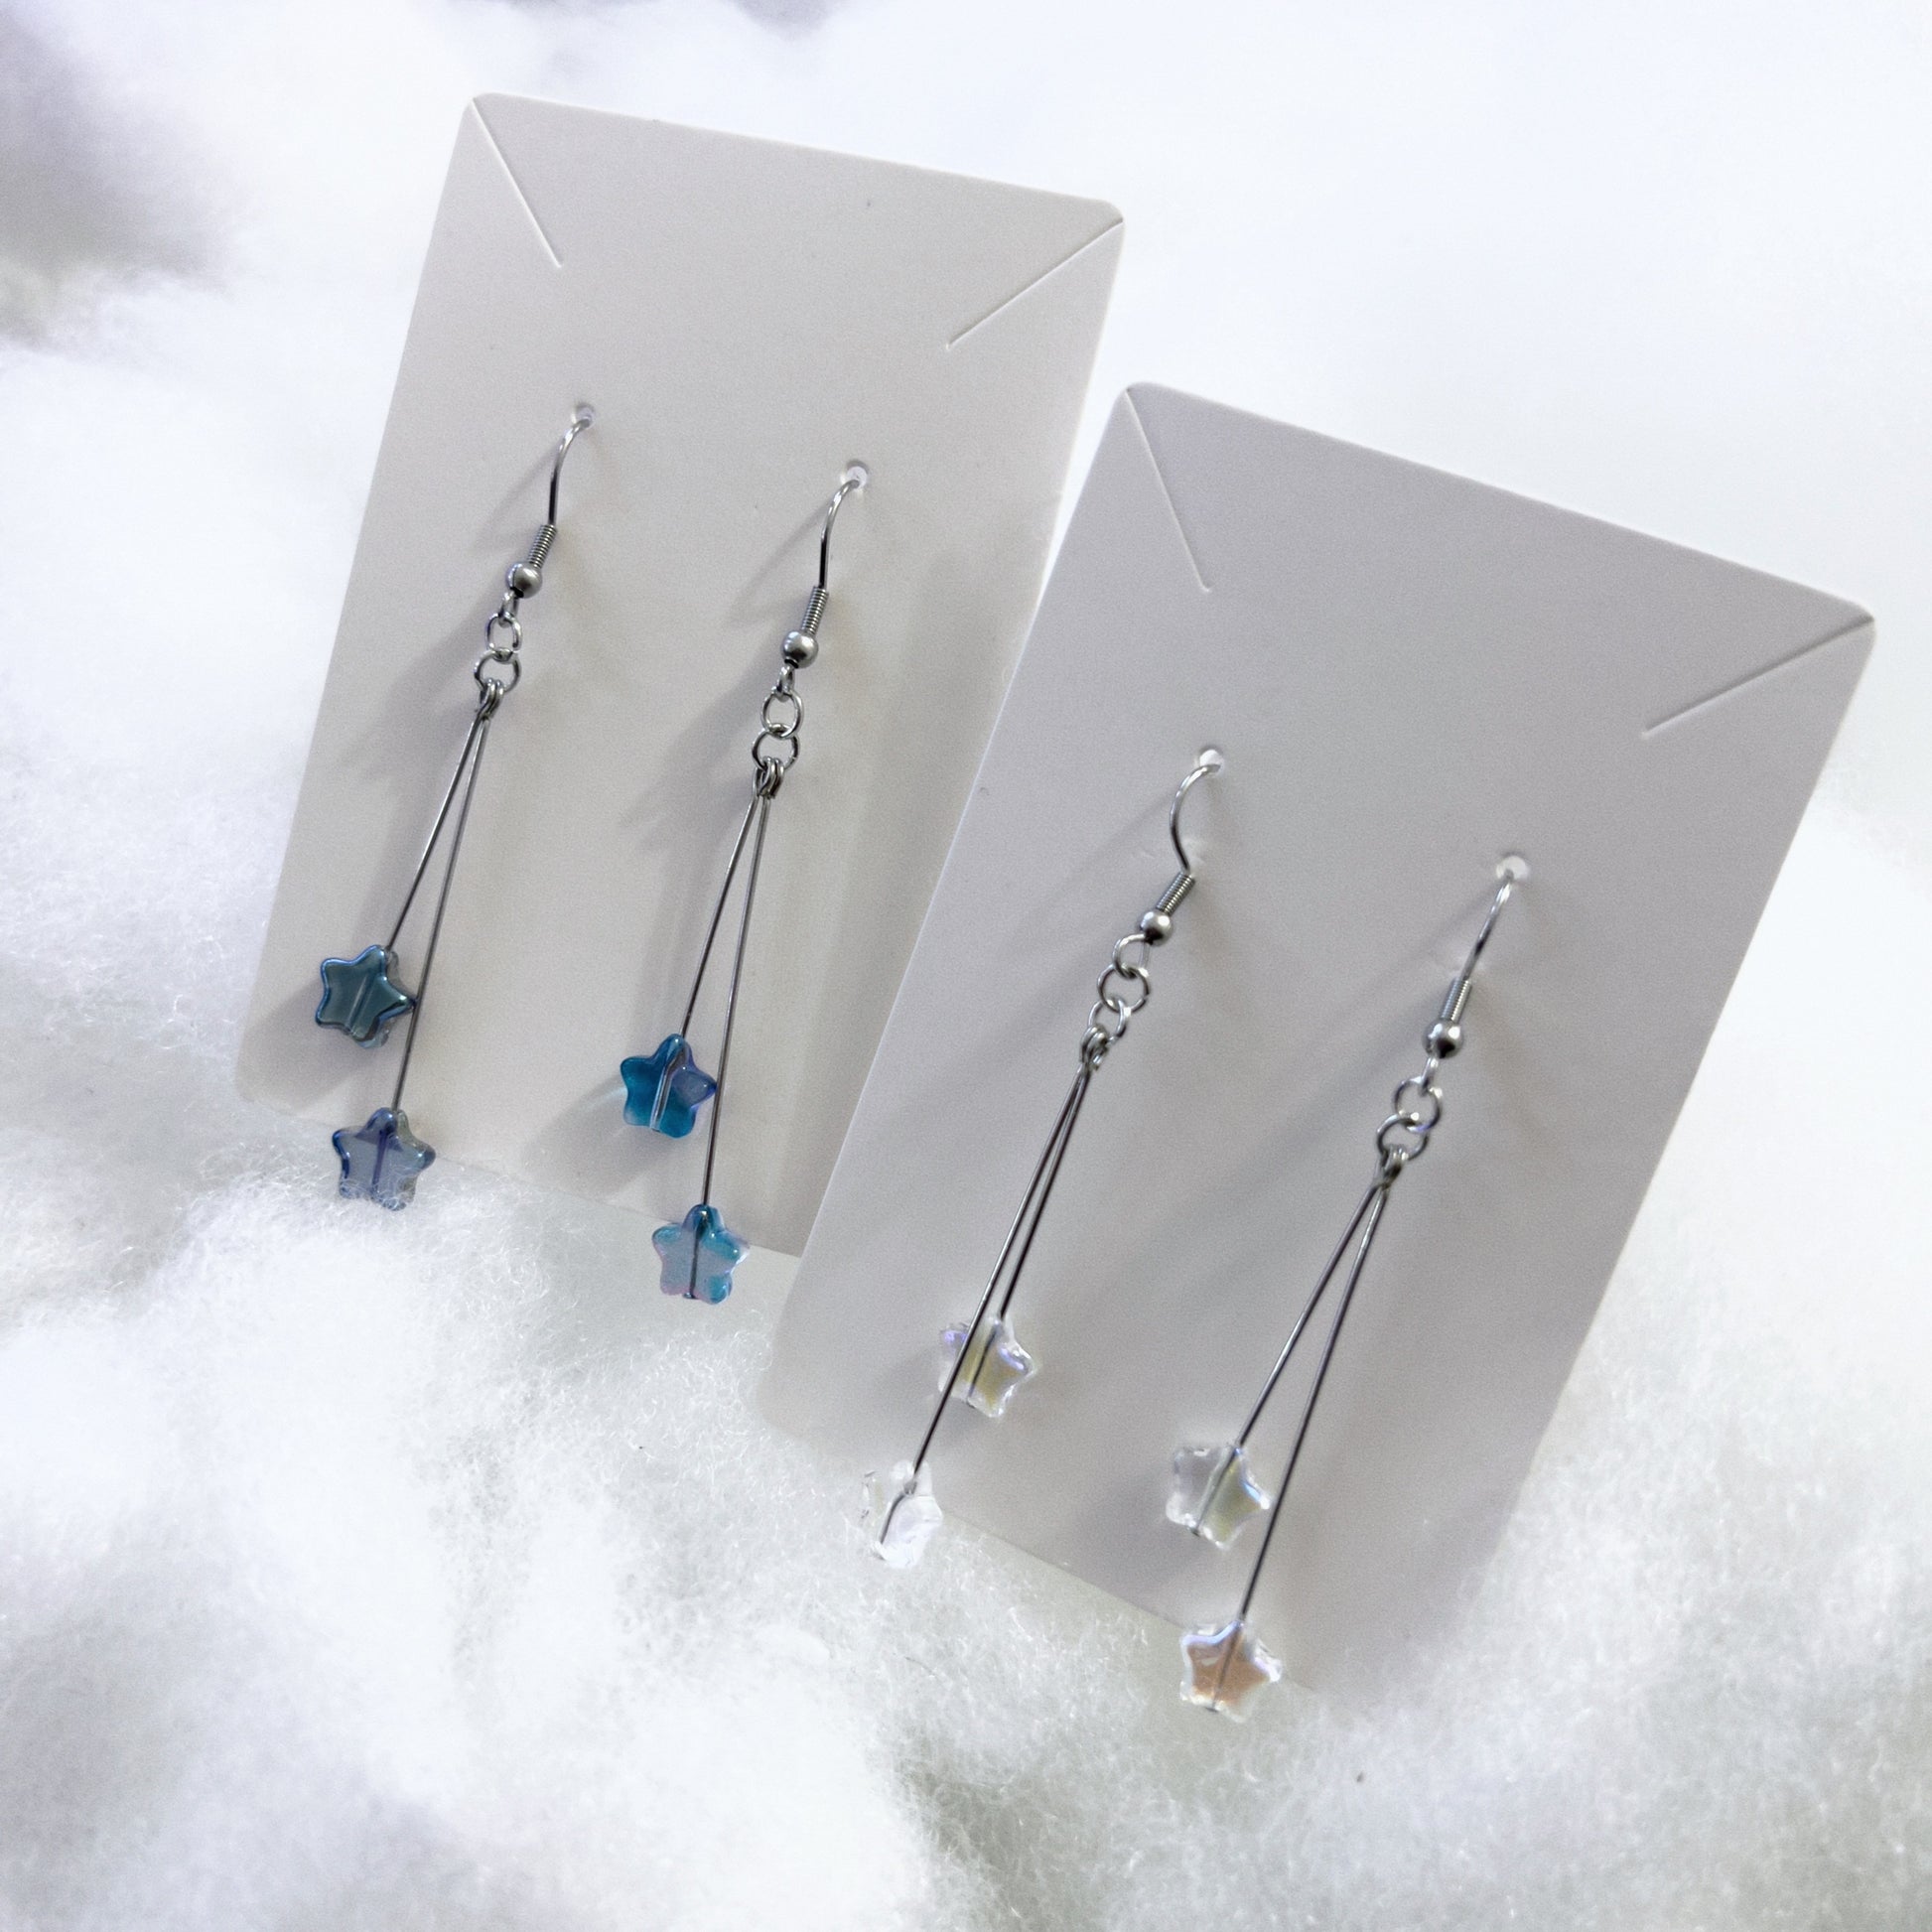 Two pairs of earrings next to each other, left with blue starry beads, and right with clear starry beads.